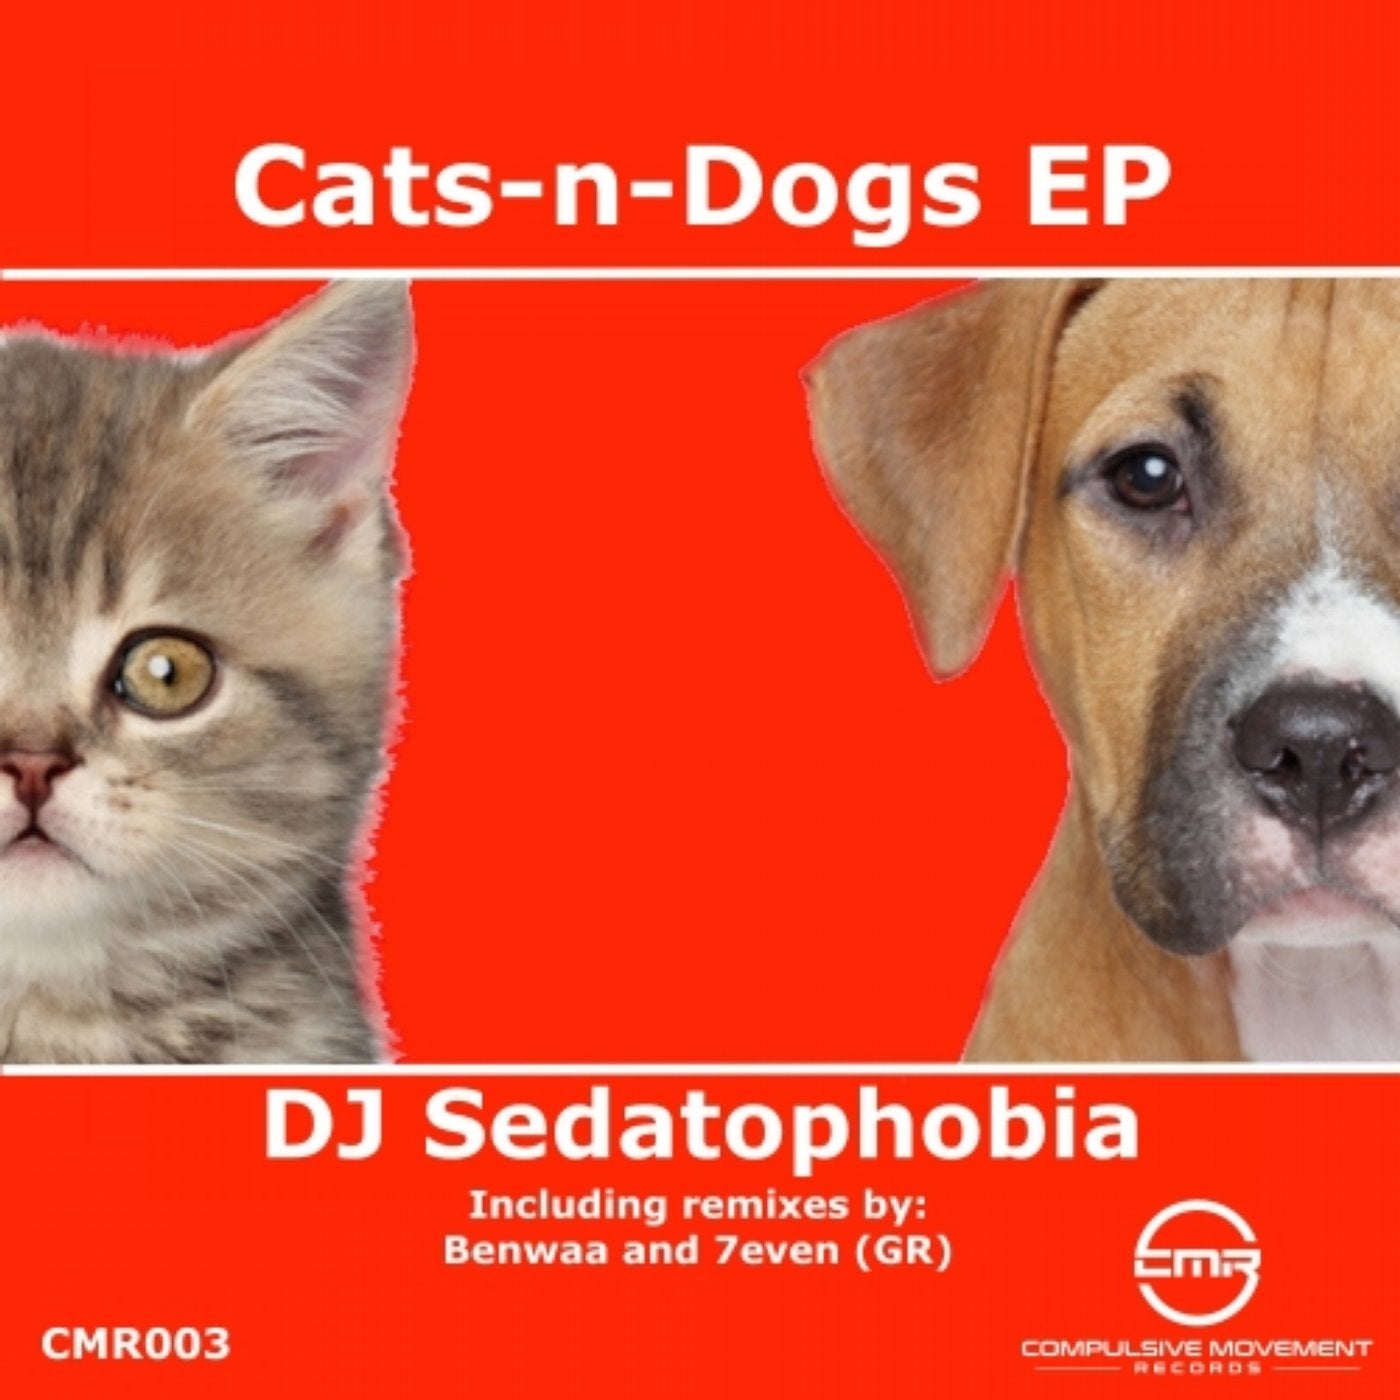 Cats-n-Dogs EP